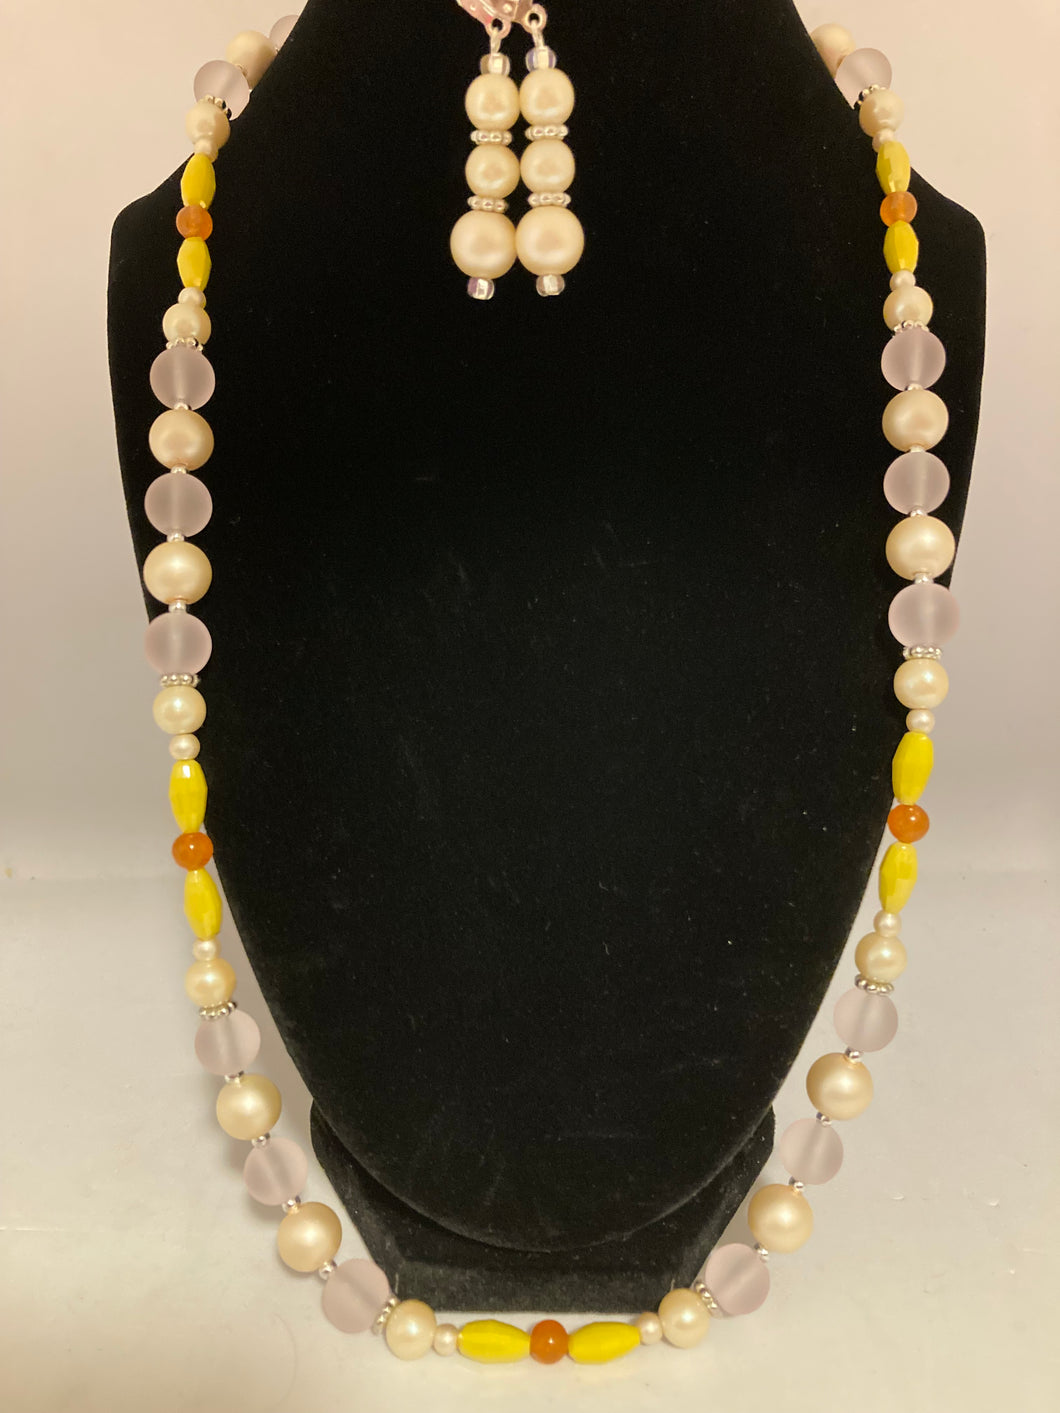 Pearl and Opal necklace with matching earrings